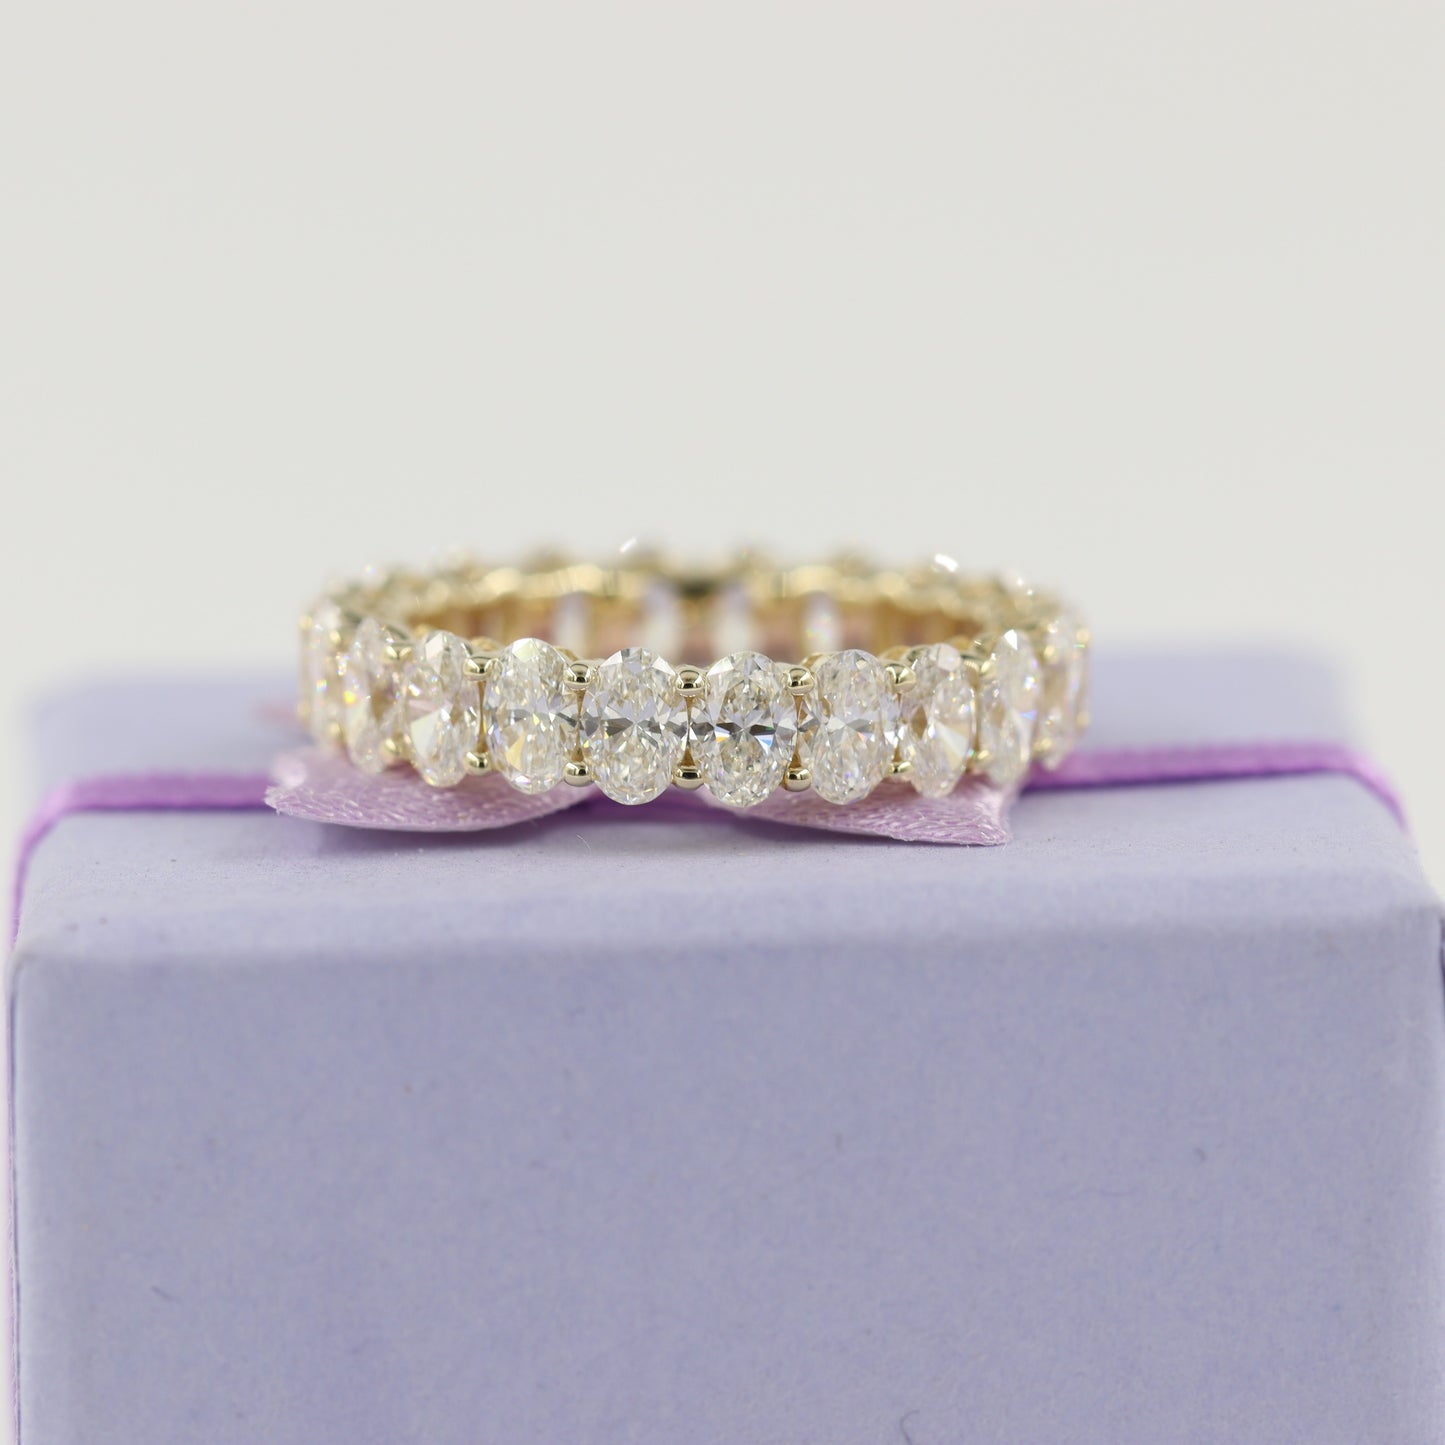 3.15ct Oval Diamond Ring/22stones Eternity Wedding Band/14K gold Oval Diamond Full Eternity Ring/ Wedding Ring/ Engagement Ring/Gift for her